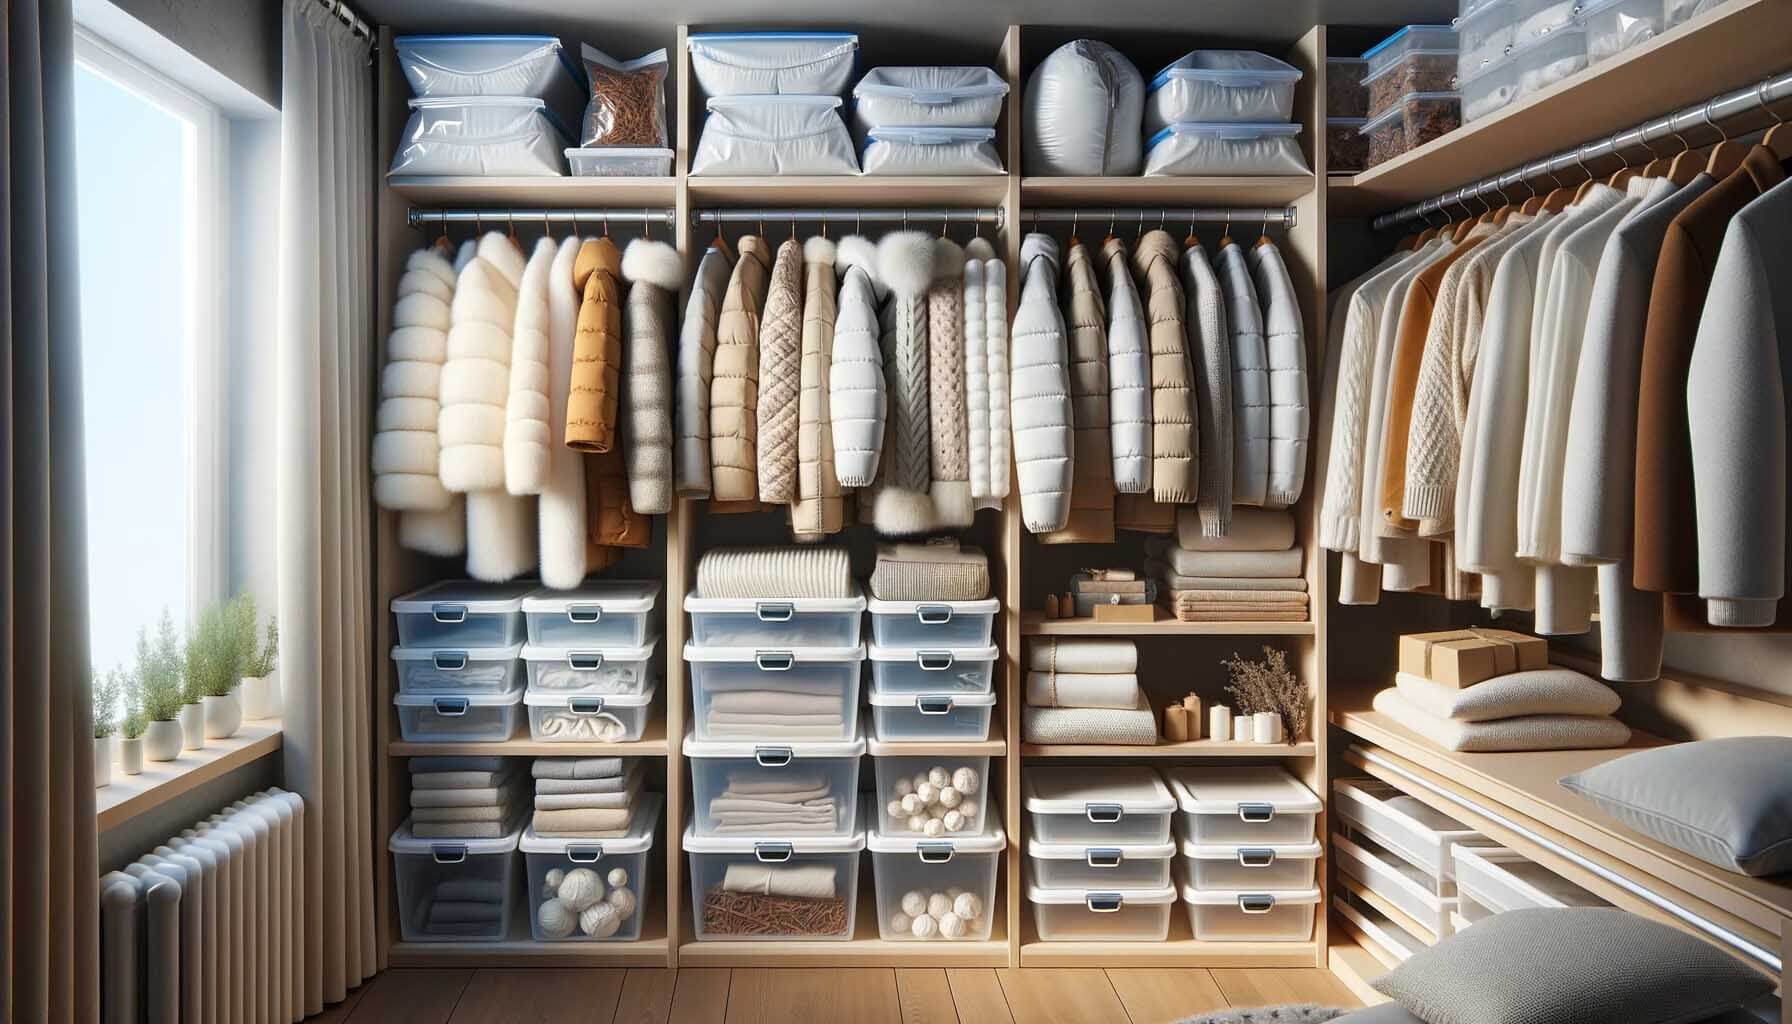 How to Properly Store Winter Clothing?